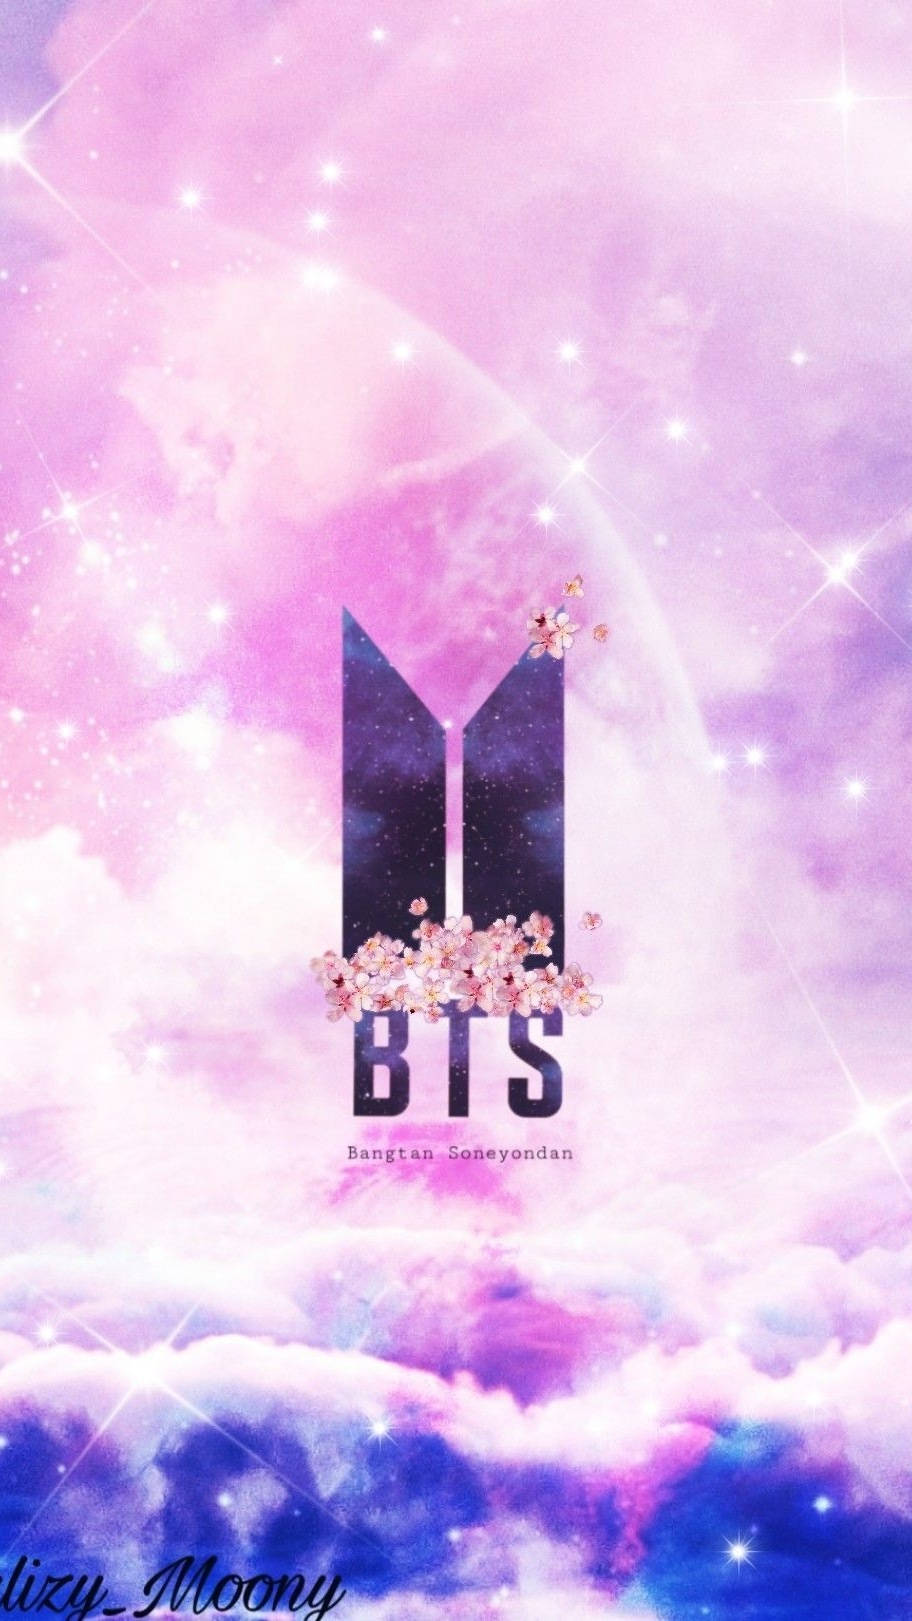 Top 999 Bts Purple Aesthetic Wallpaper Full HD 4K Free To Use